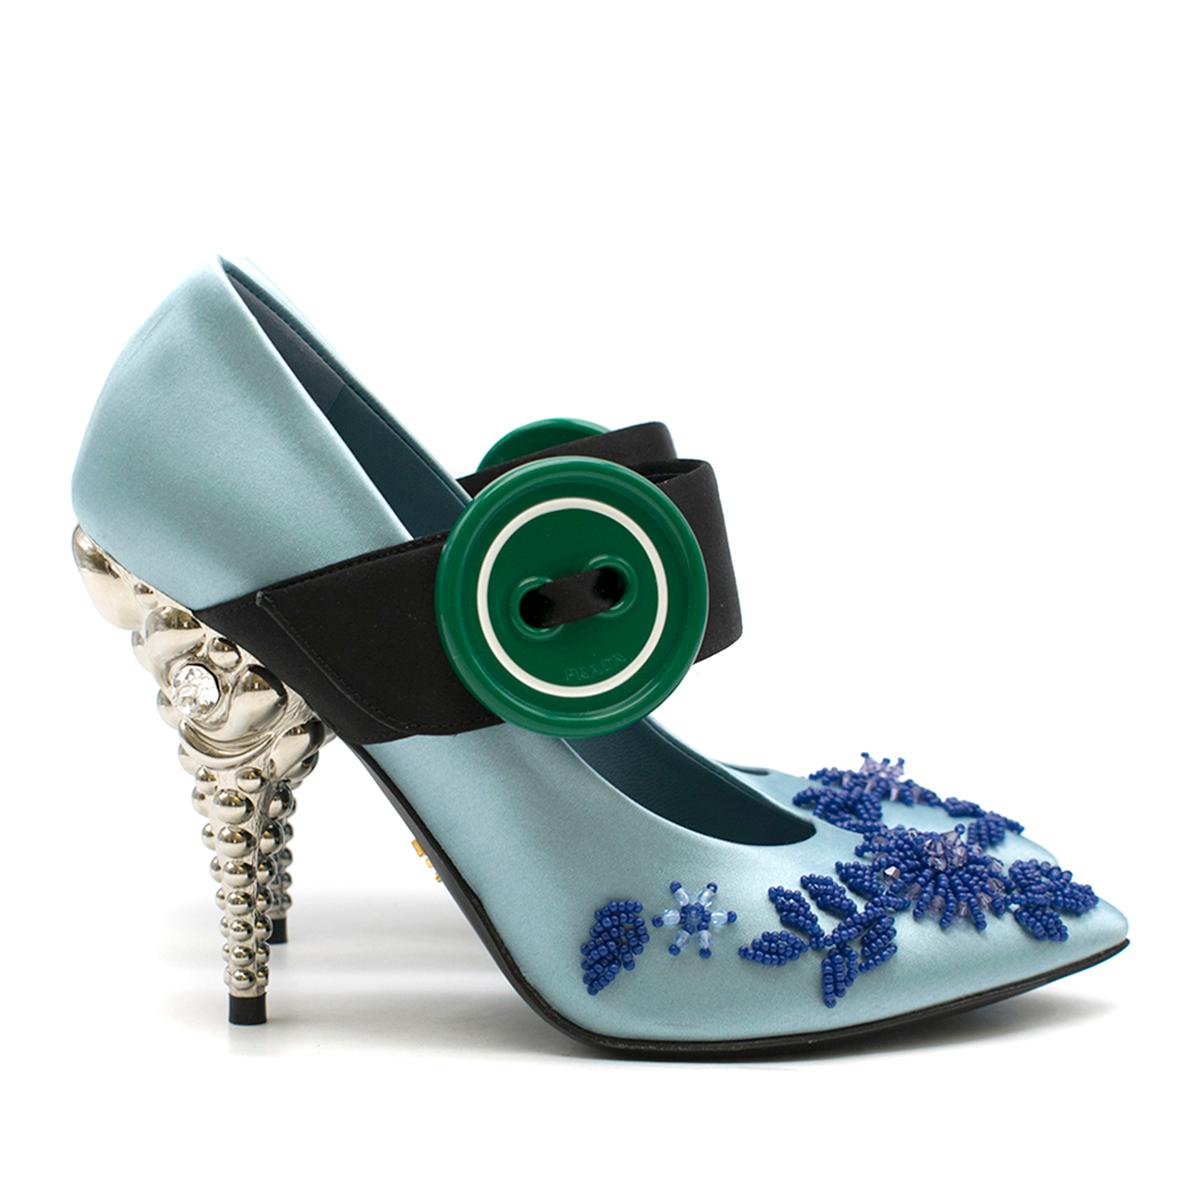 Prada Blue Bead-embellished Satin Pump

- Blue satin pump
- Pointed toe
- Front bead embellishment 
- Front black strap with oversized green button
- Silver-tone 3-D decorative high heel, clear crystal embellished 
- Blue leather lining with logo